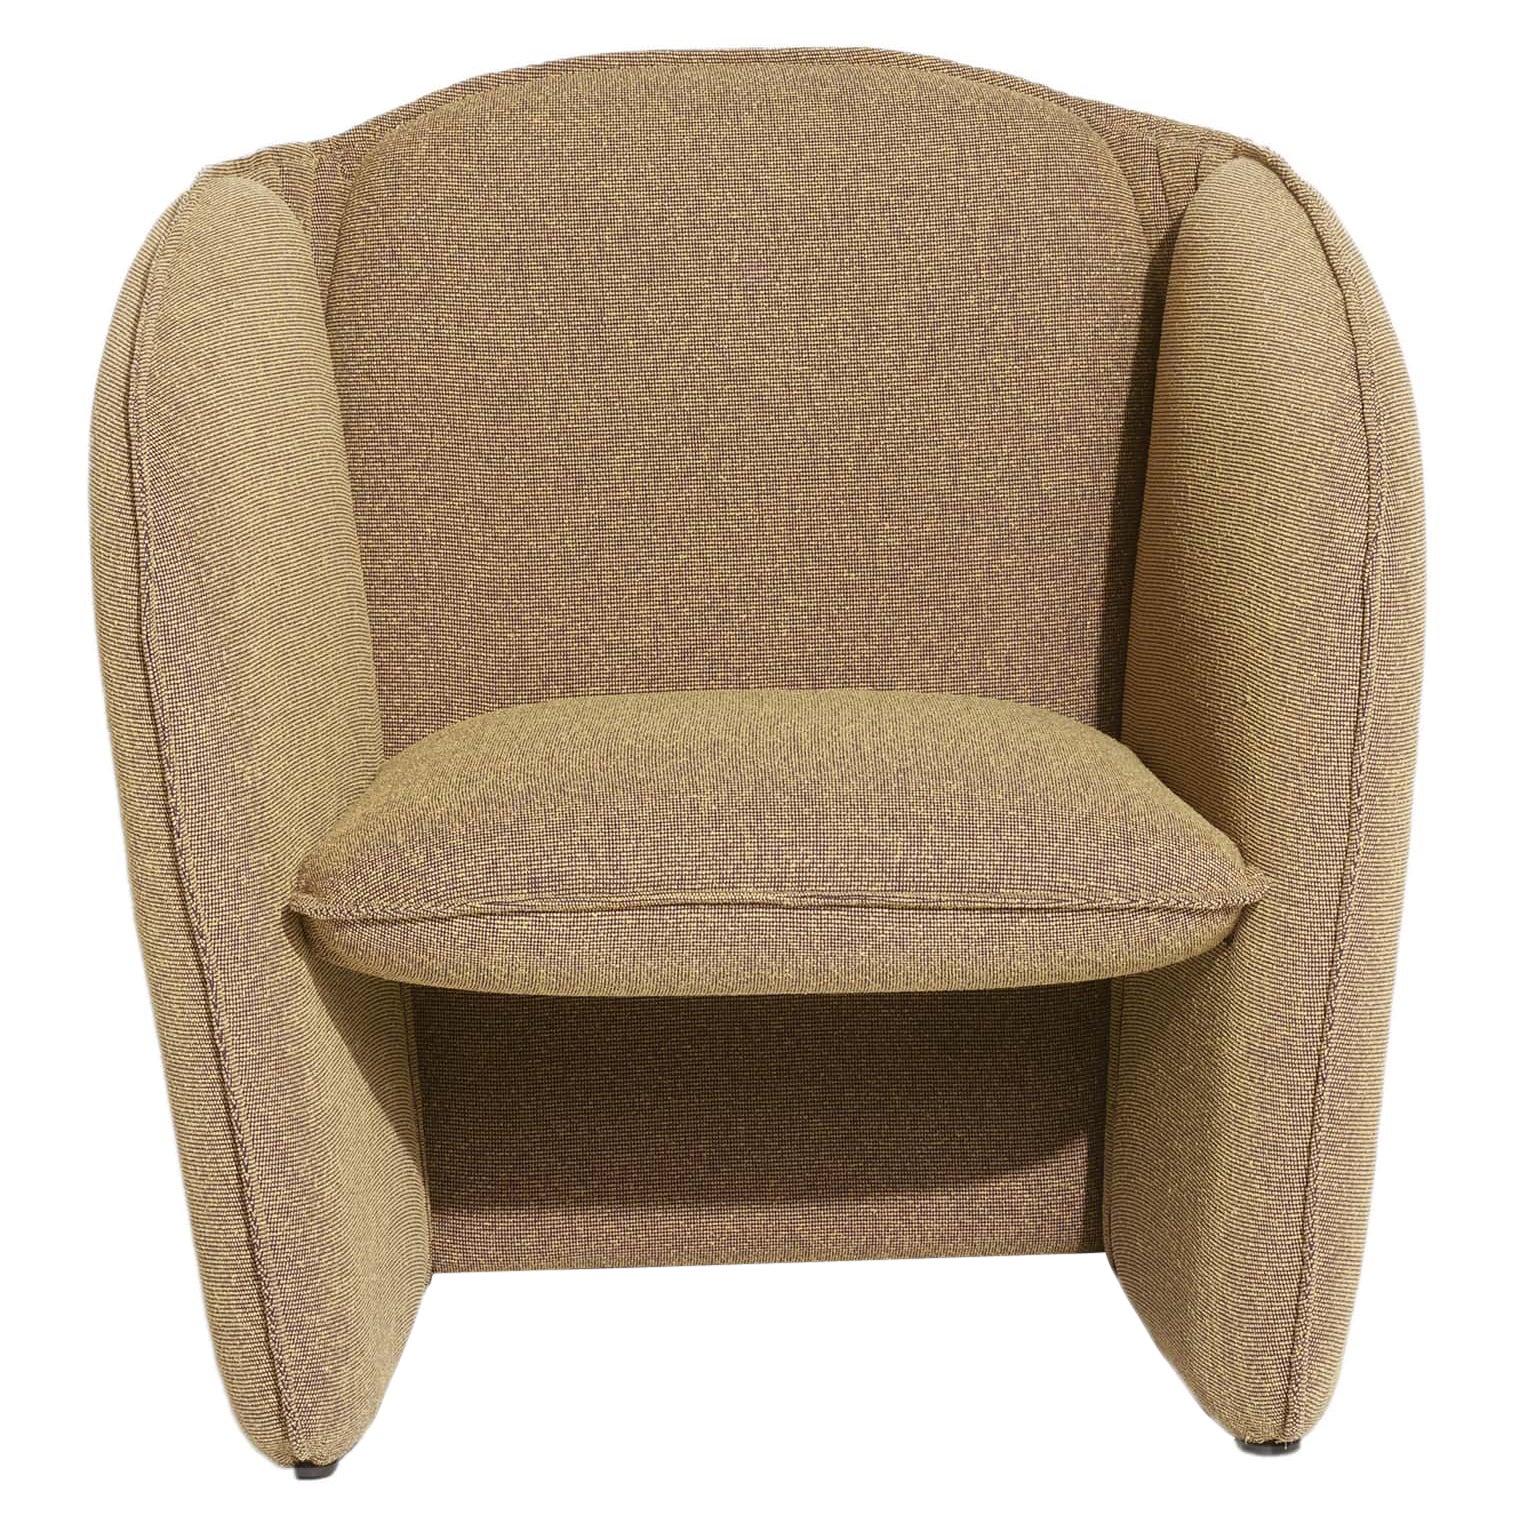 Petite Friture Lily Armchair in Yellow - Plum by Färg & Blanche, 2022